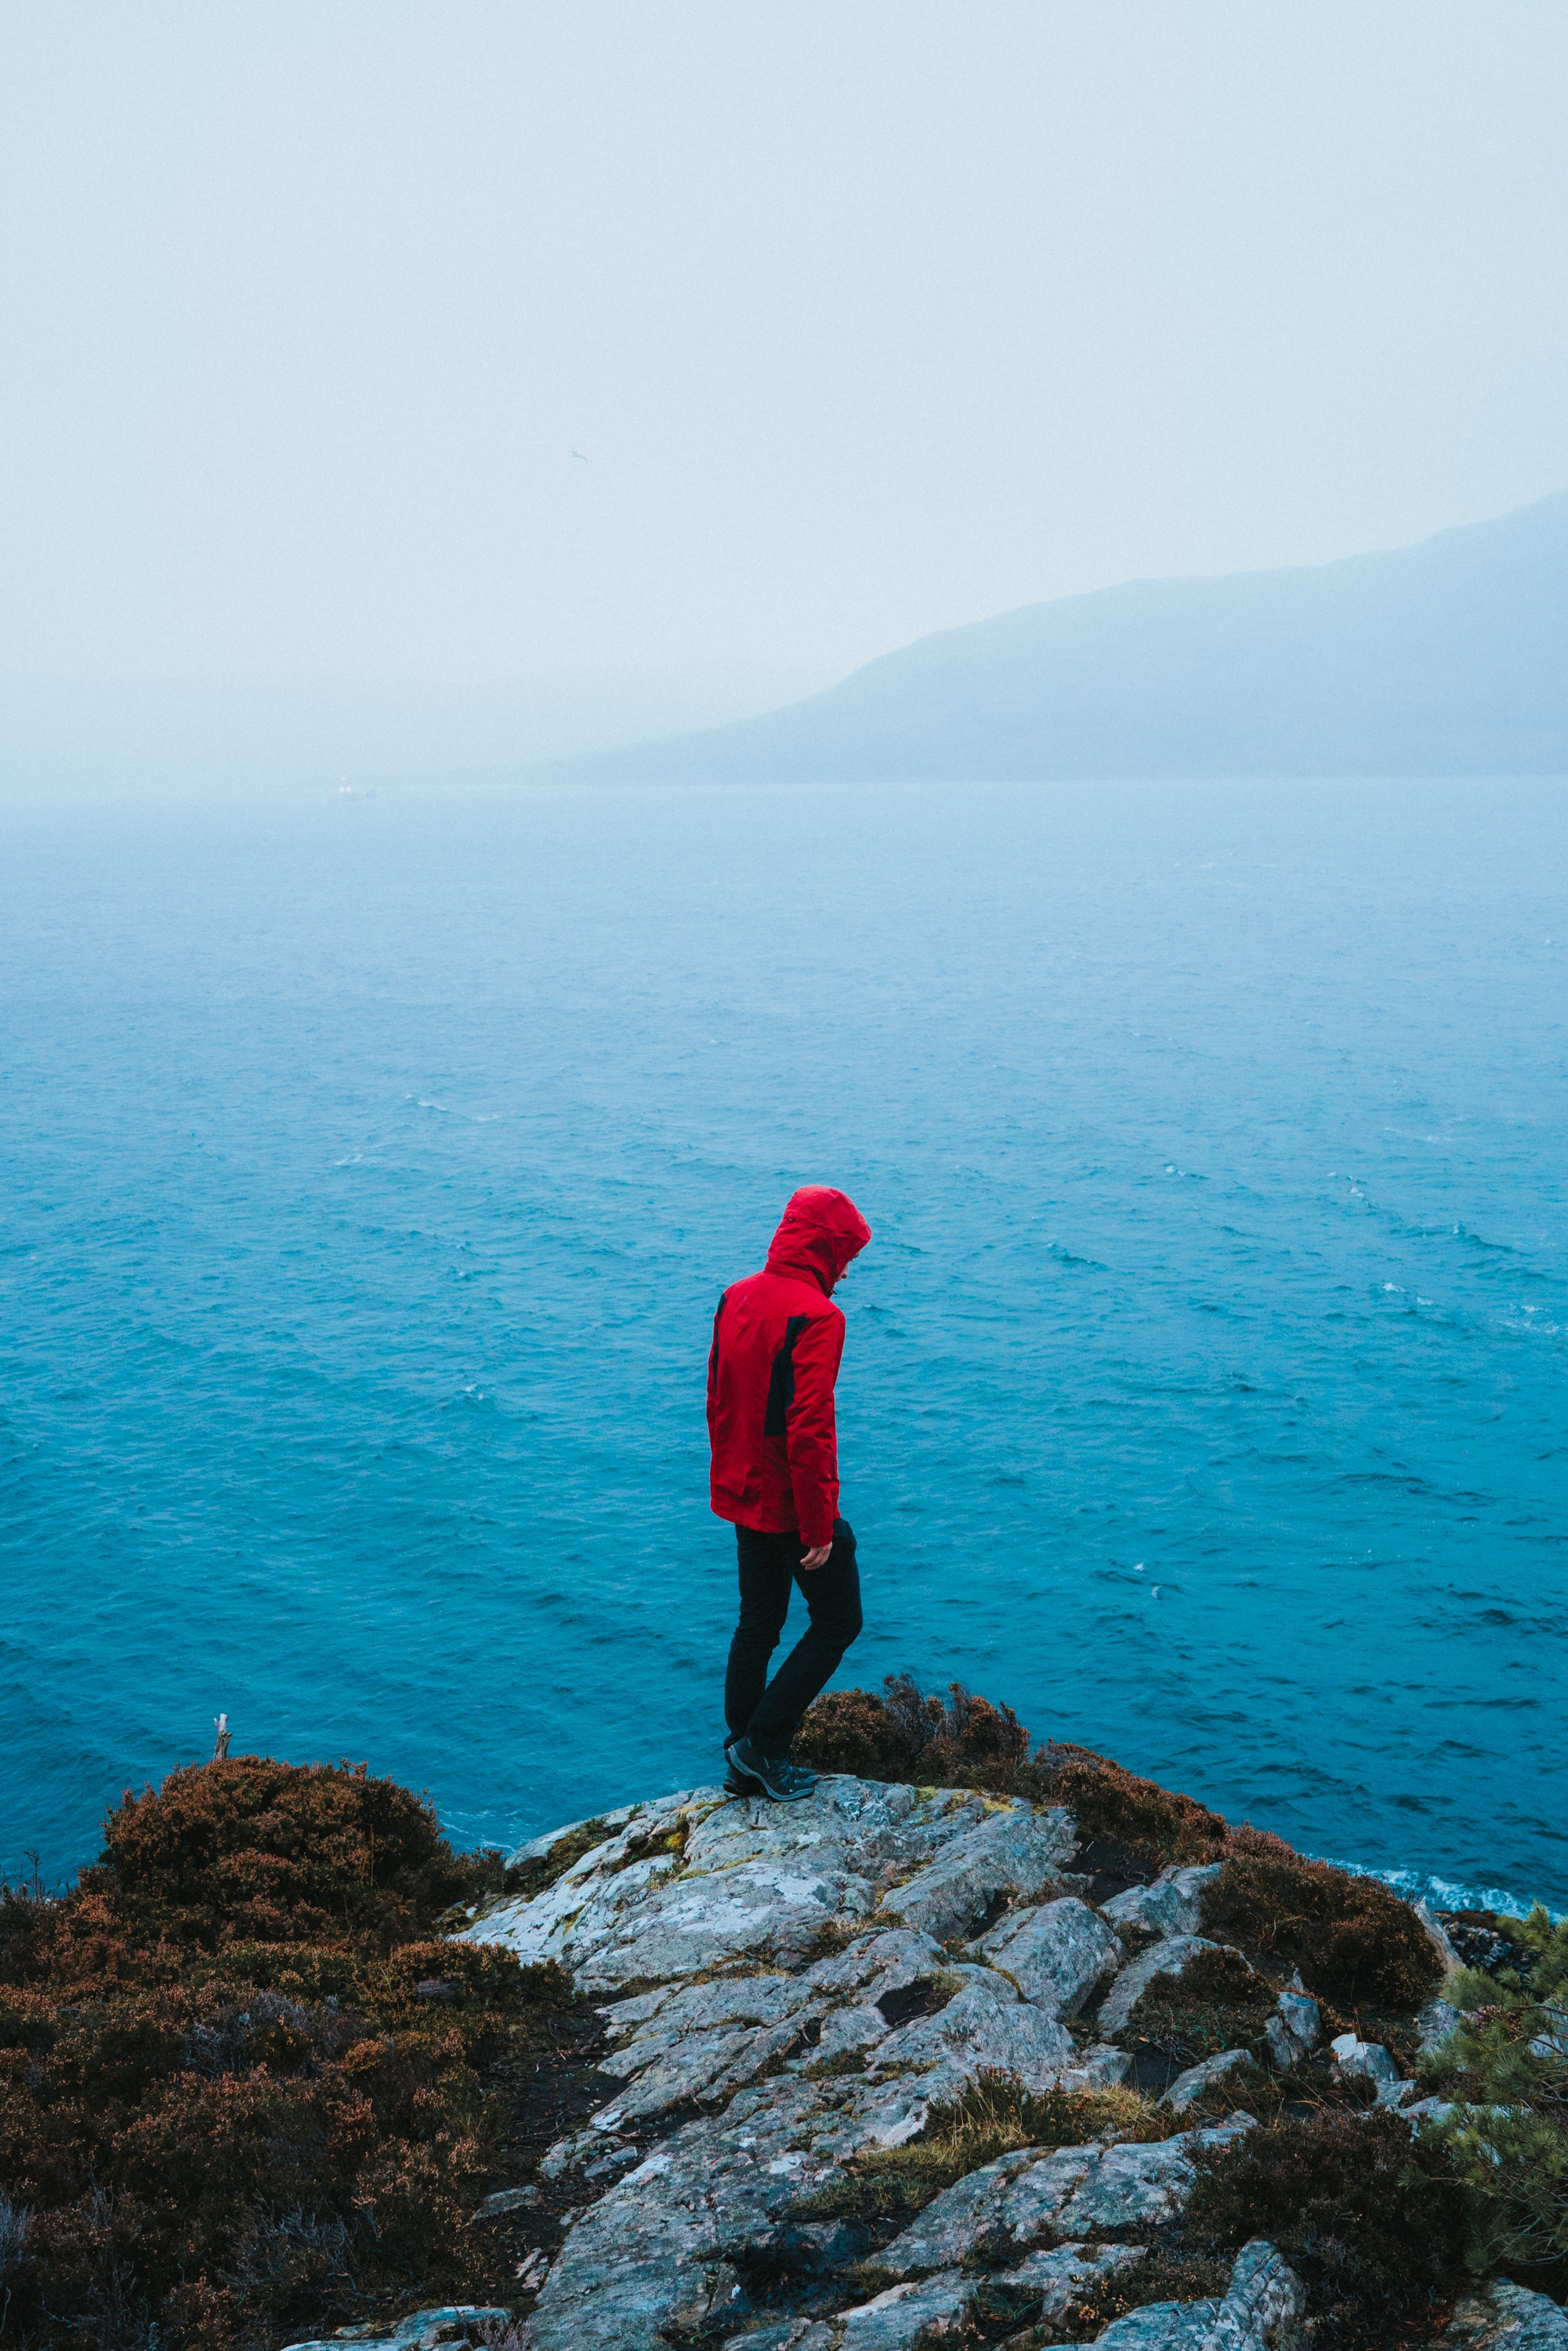 A person wearing a red jacket standing on a cliff by the water